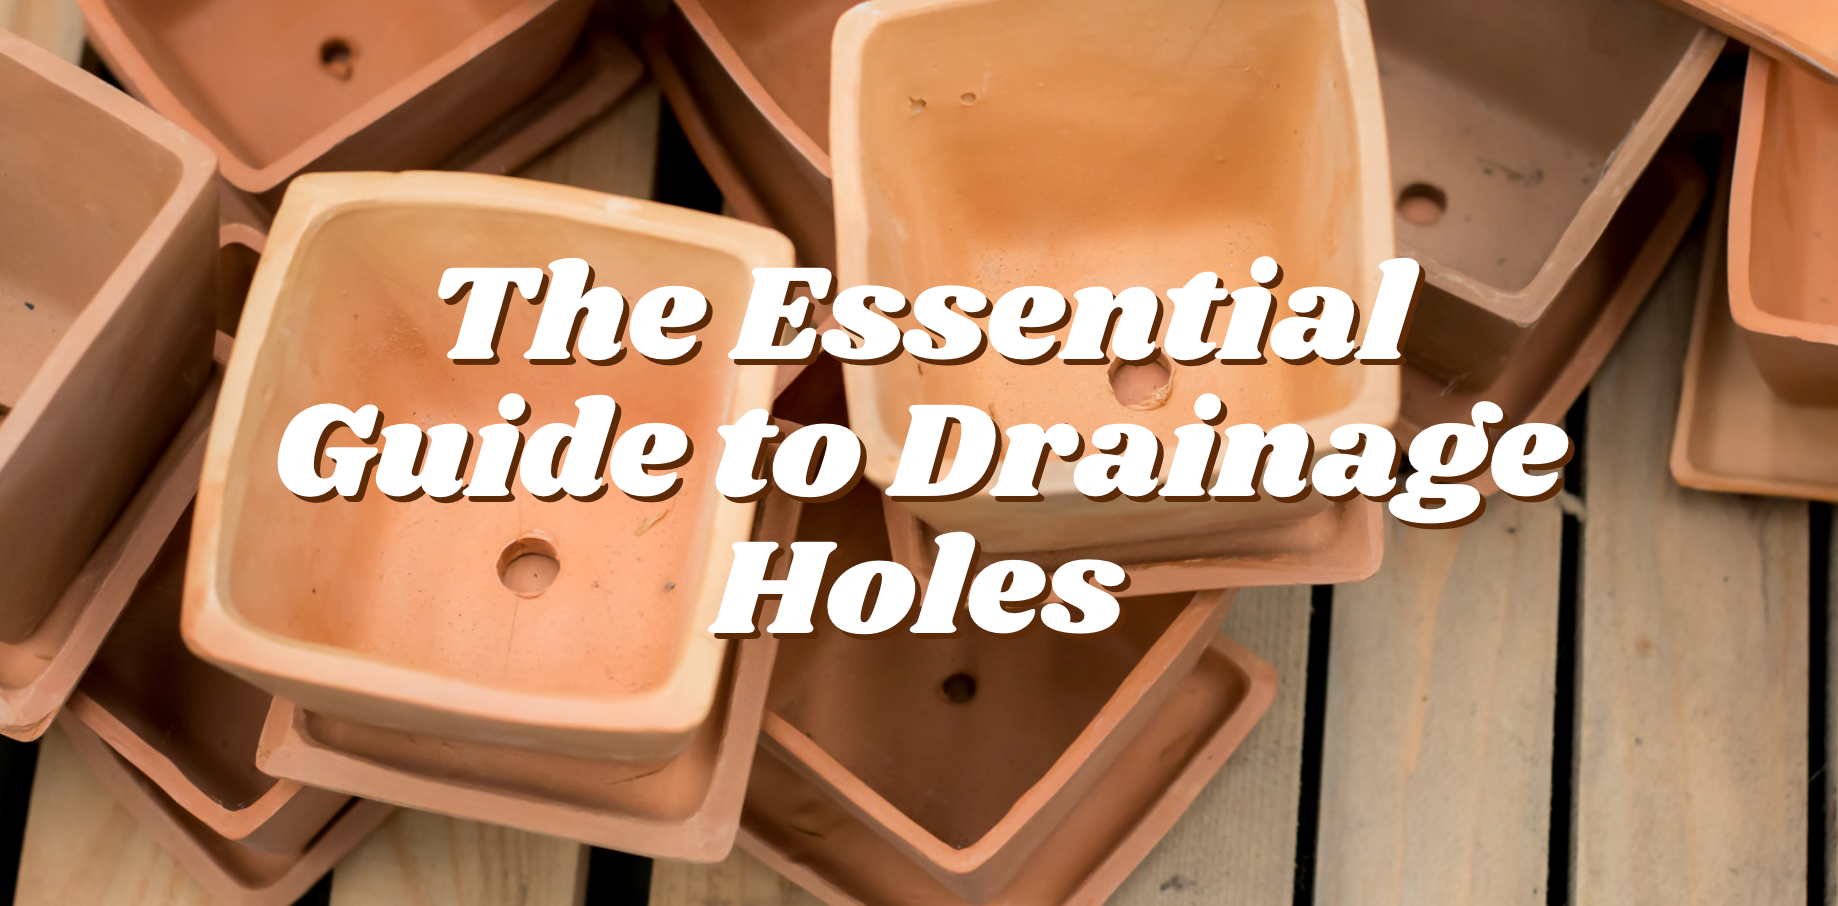 The Essential Guide to Drainage Holes